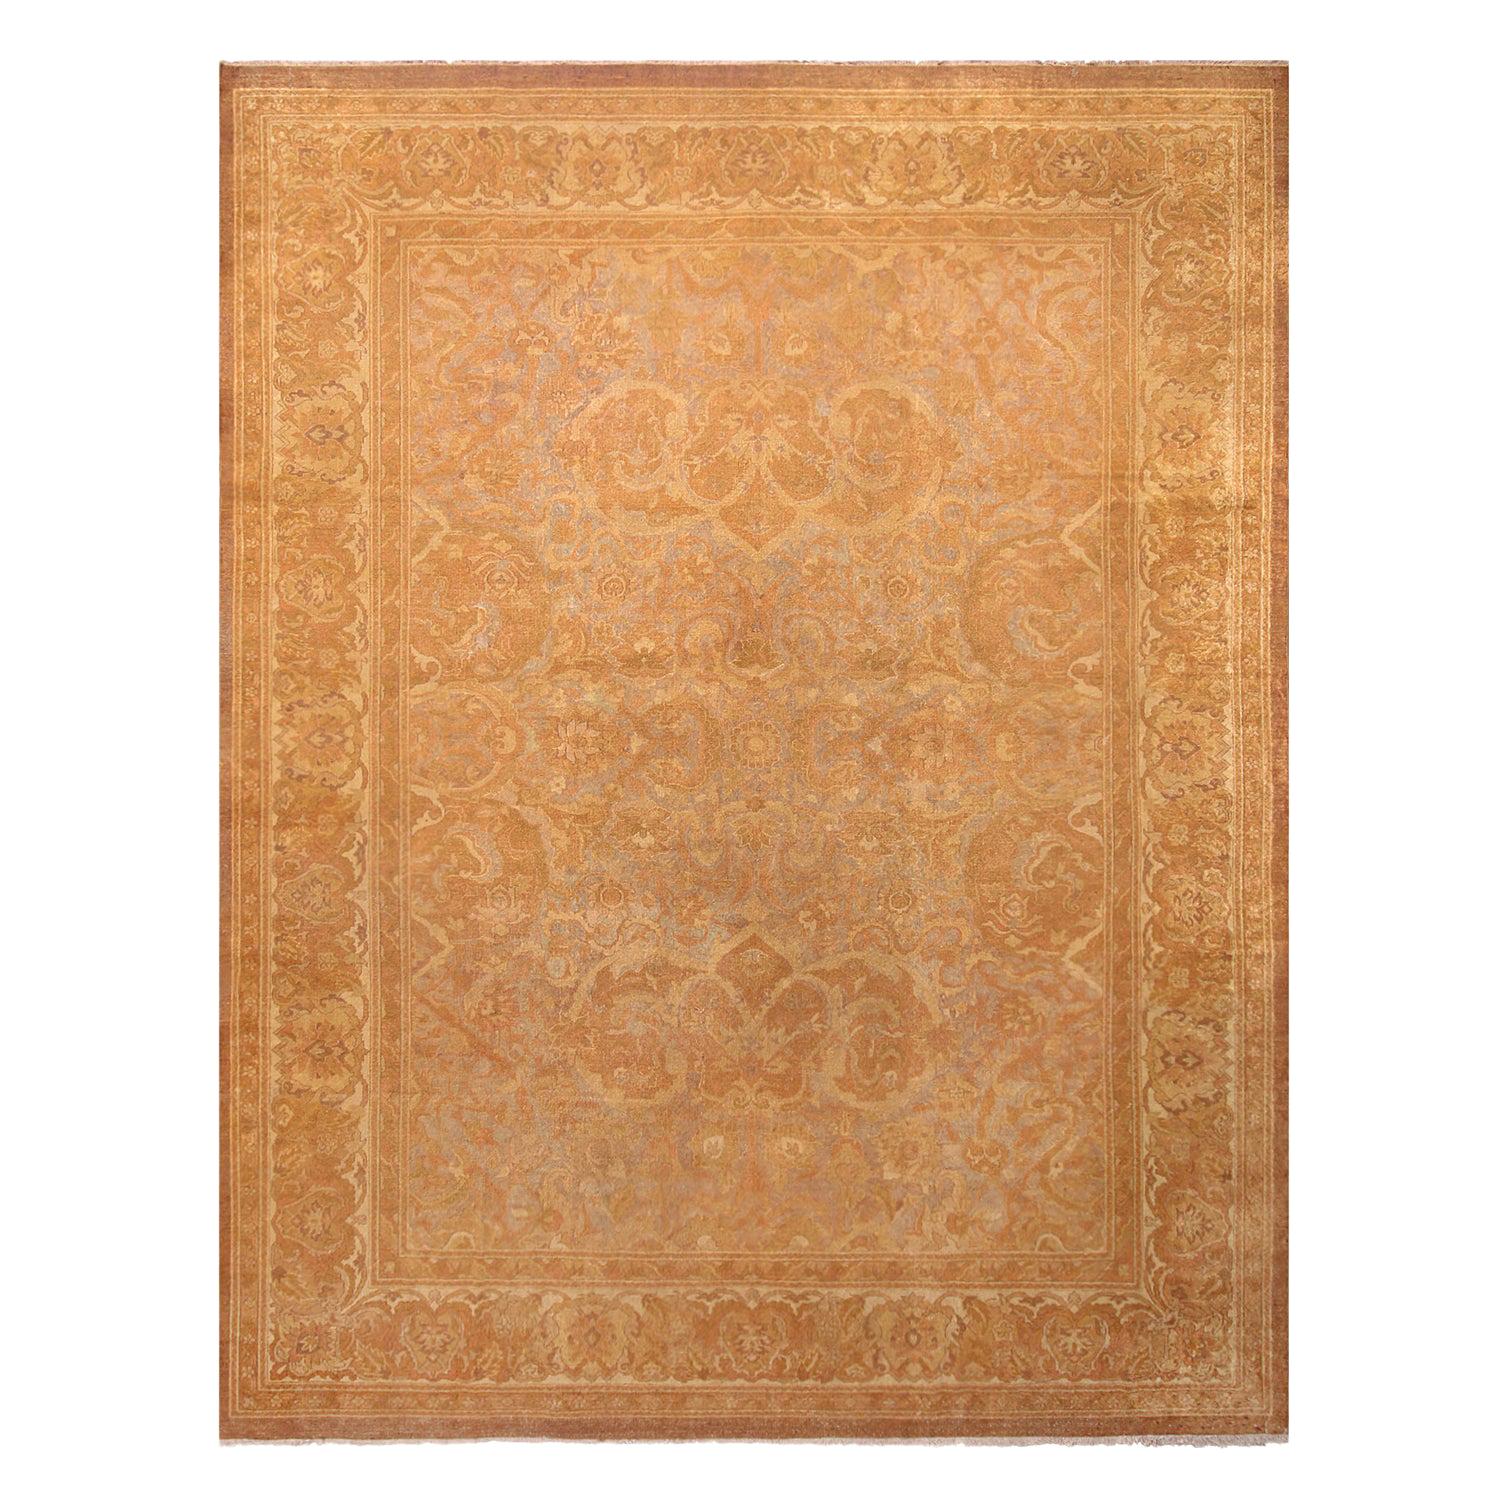 Antique Amritsar Beige-Brown Wool Floral Rug with Blue Field Accents